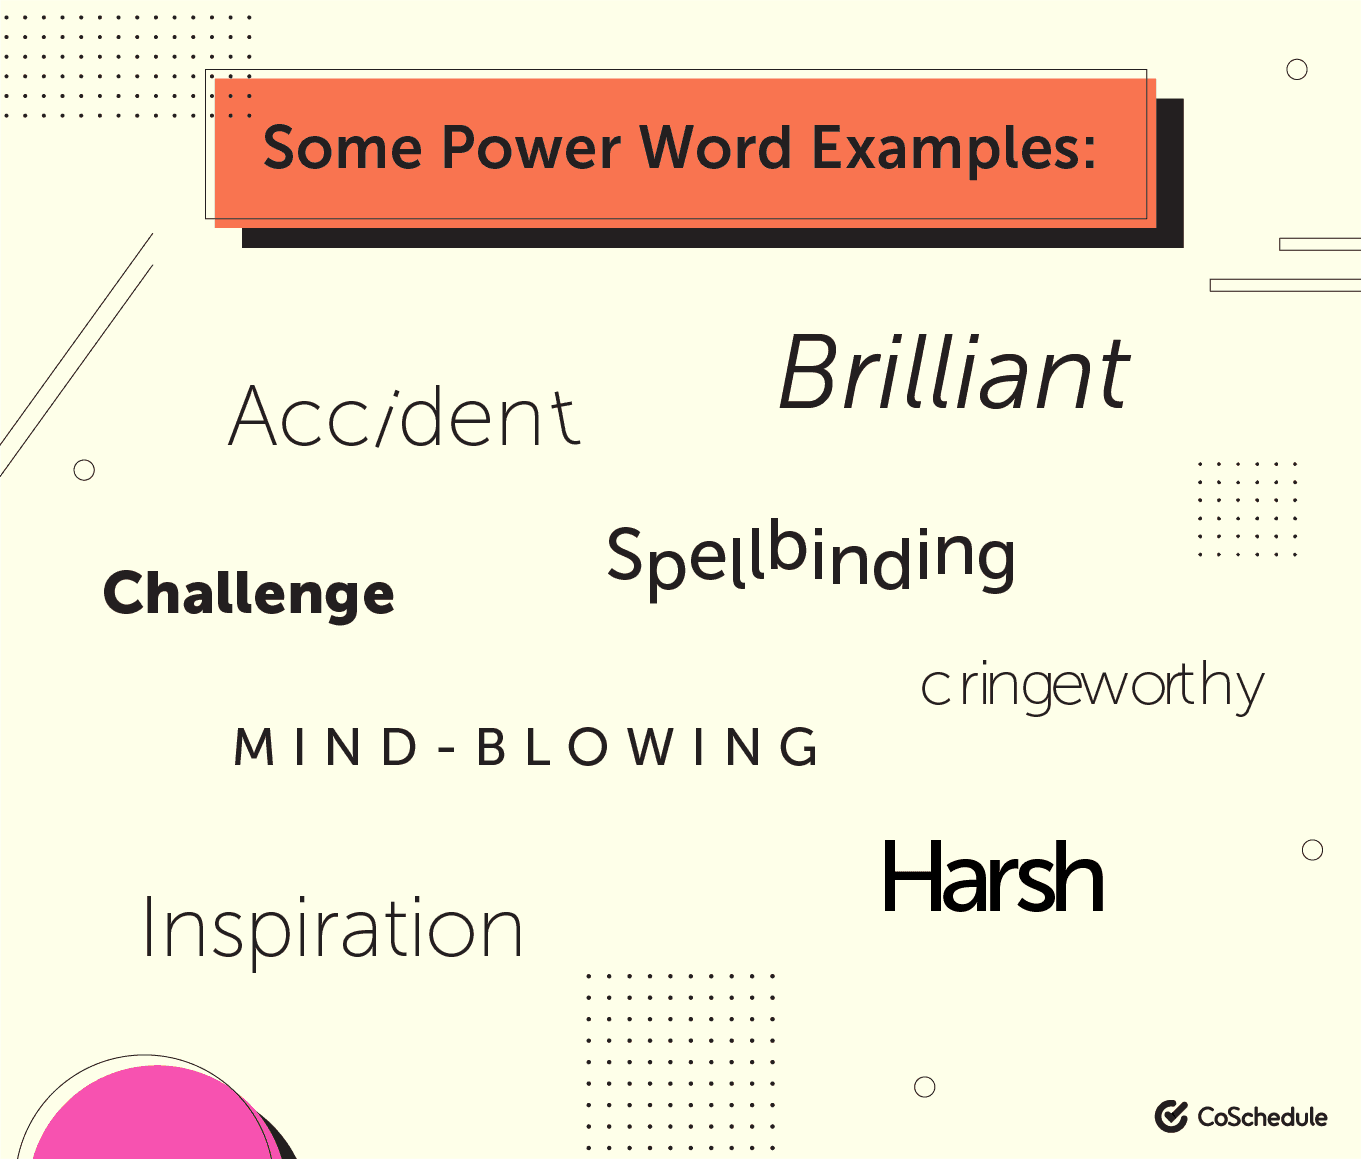 Some power word examples